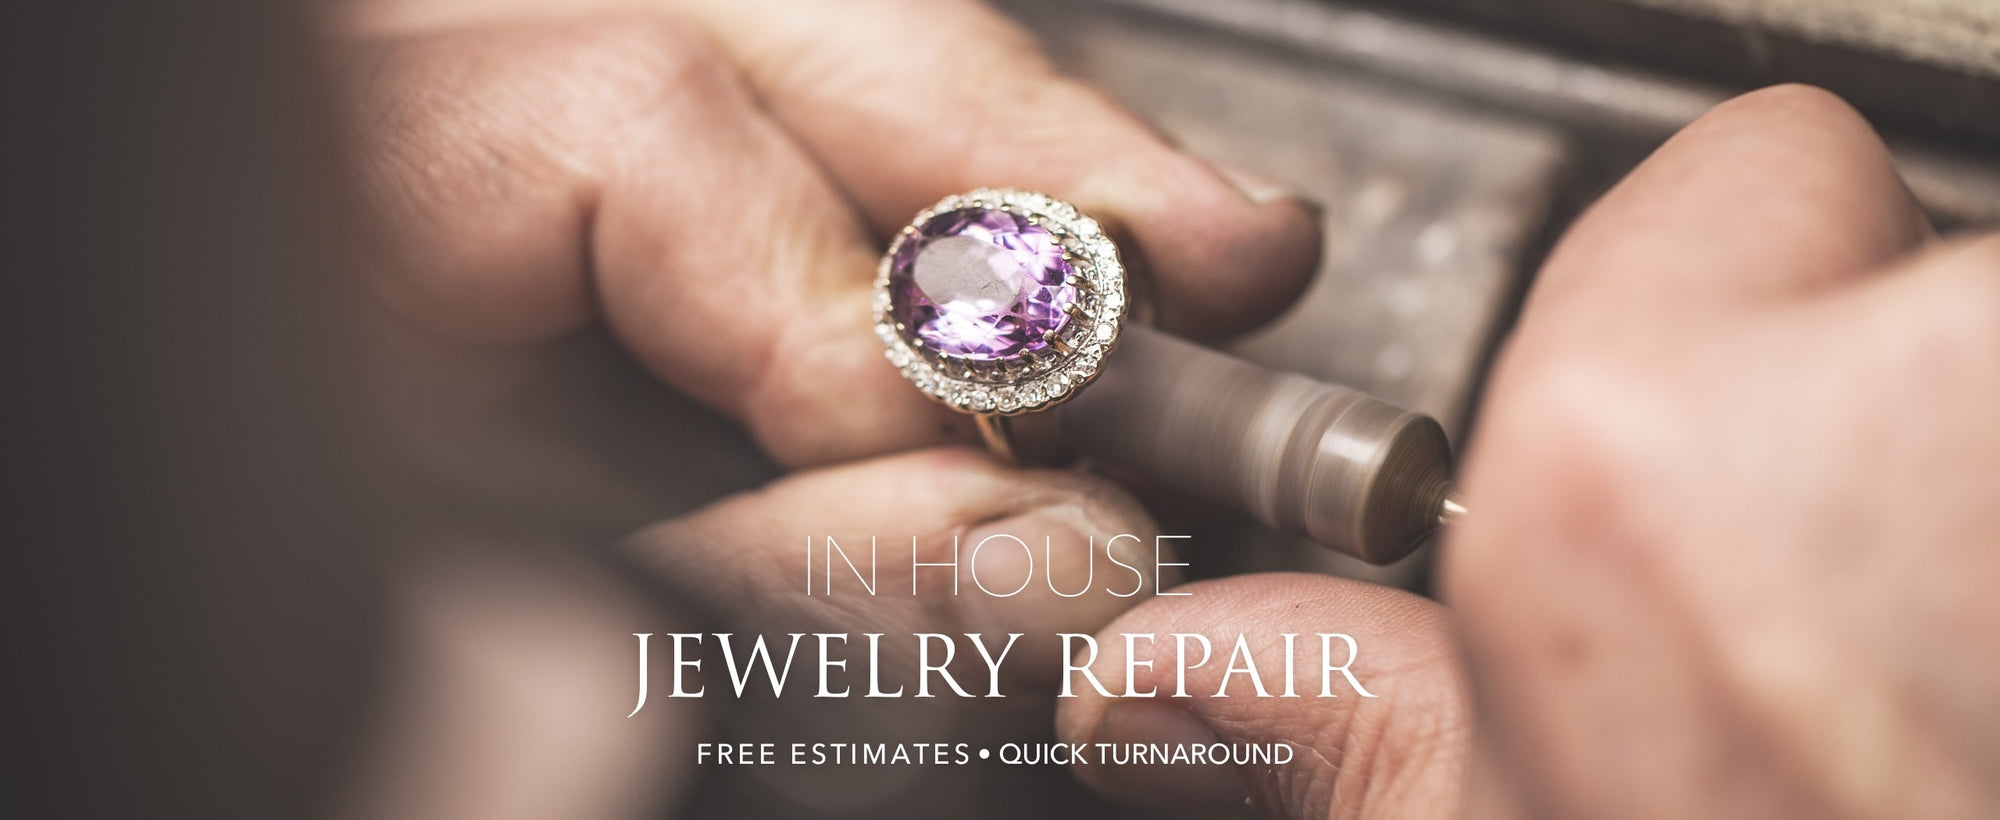 Arman's Jewellers Goldsmith in Kitchener Waterloo provides on-site Jewellery Repairs and Same Day Jewellery Services